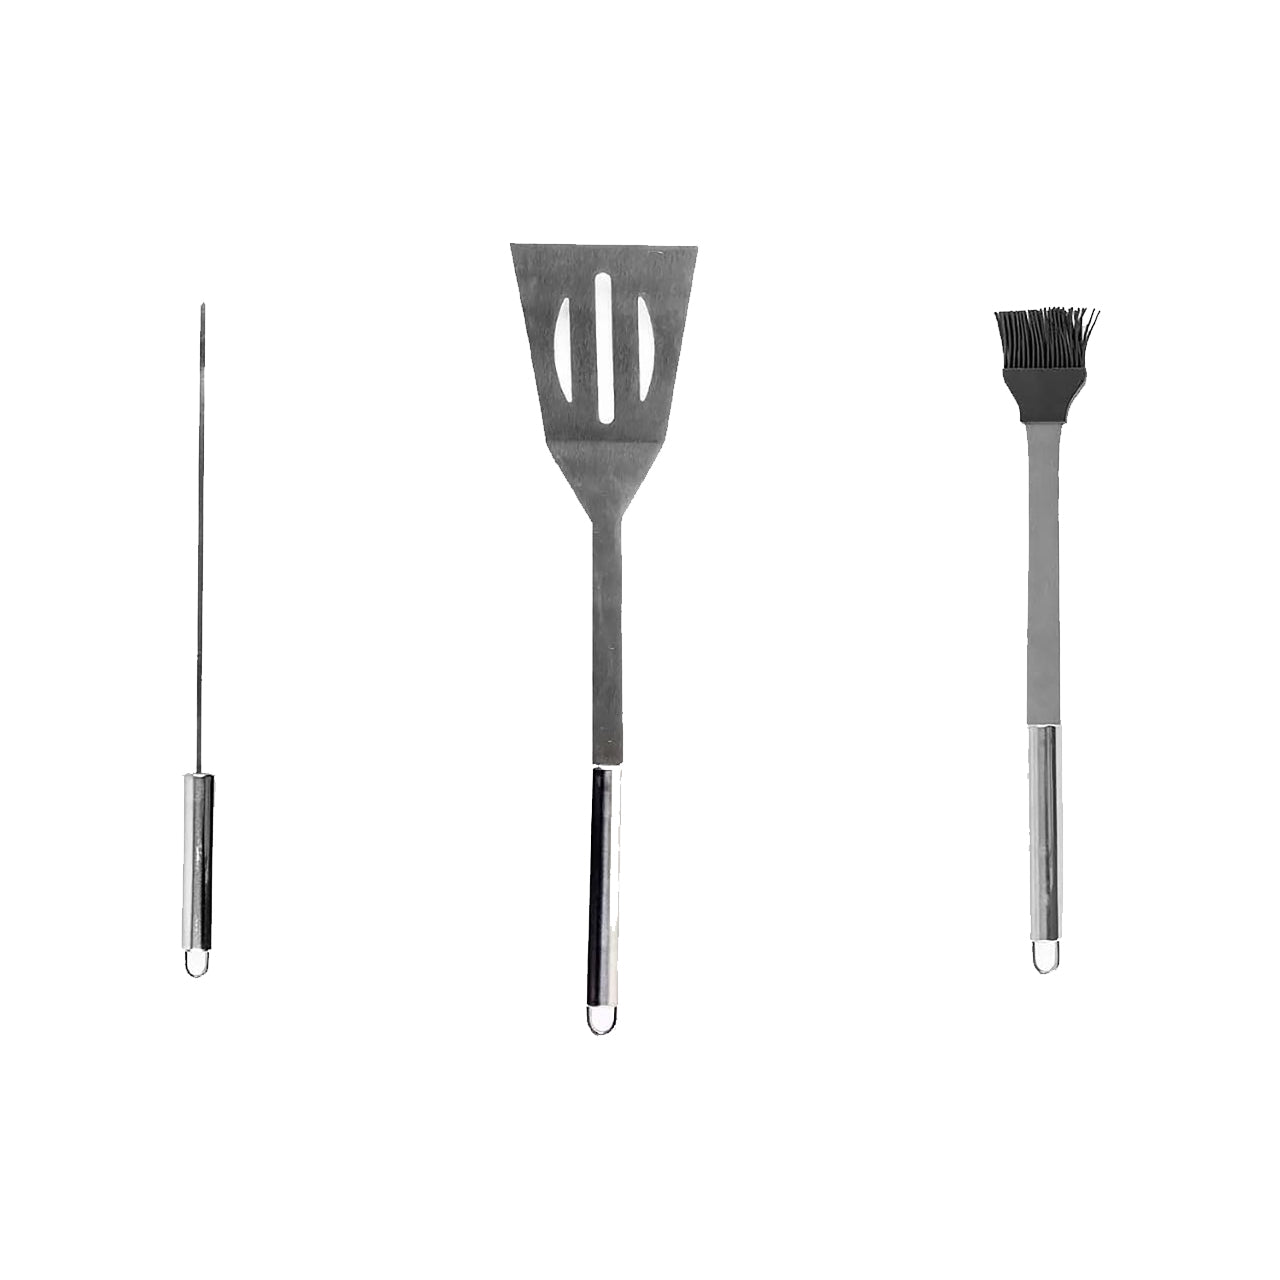 Barbeque Cooking Grill Kit, Set of 3 | Barbeque Accessories